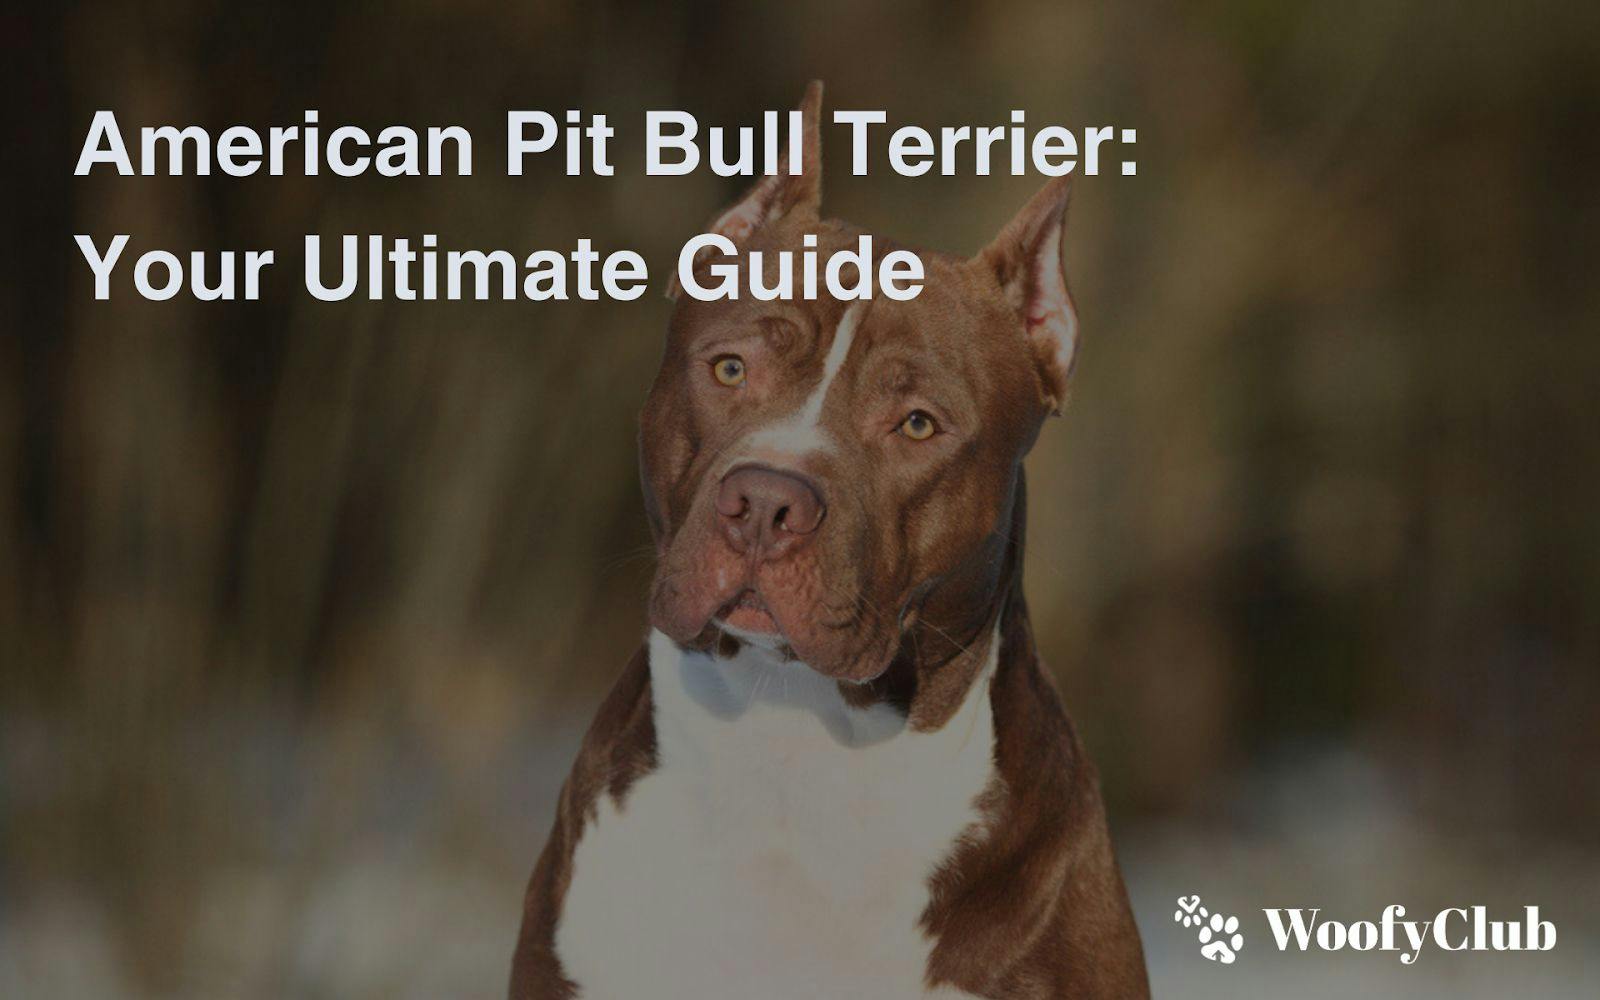 American Pit Bull Terrier: Your Ultimate Guide